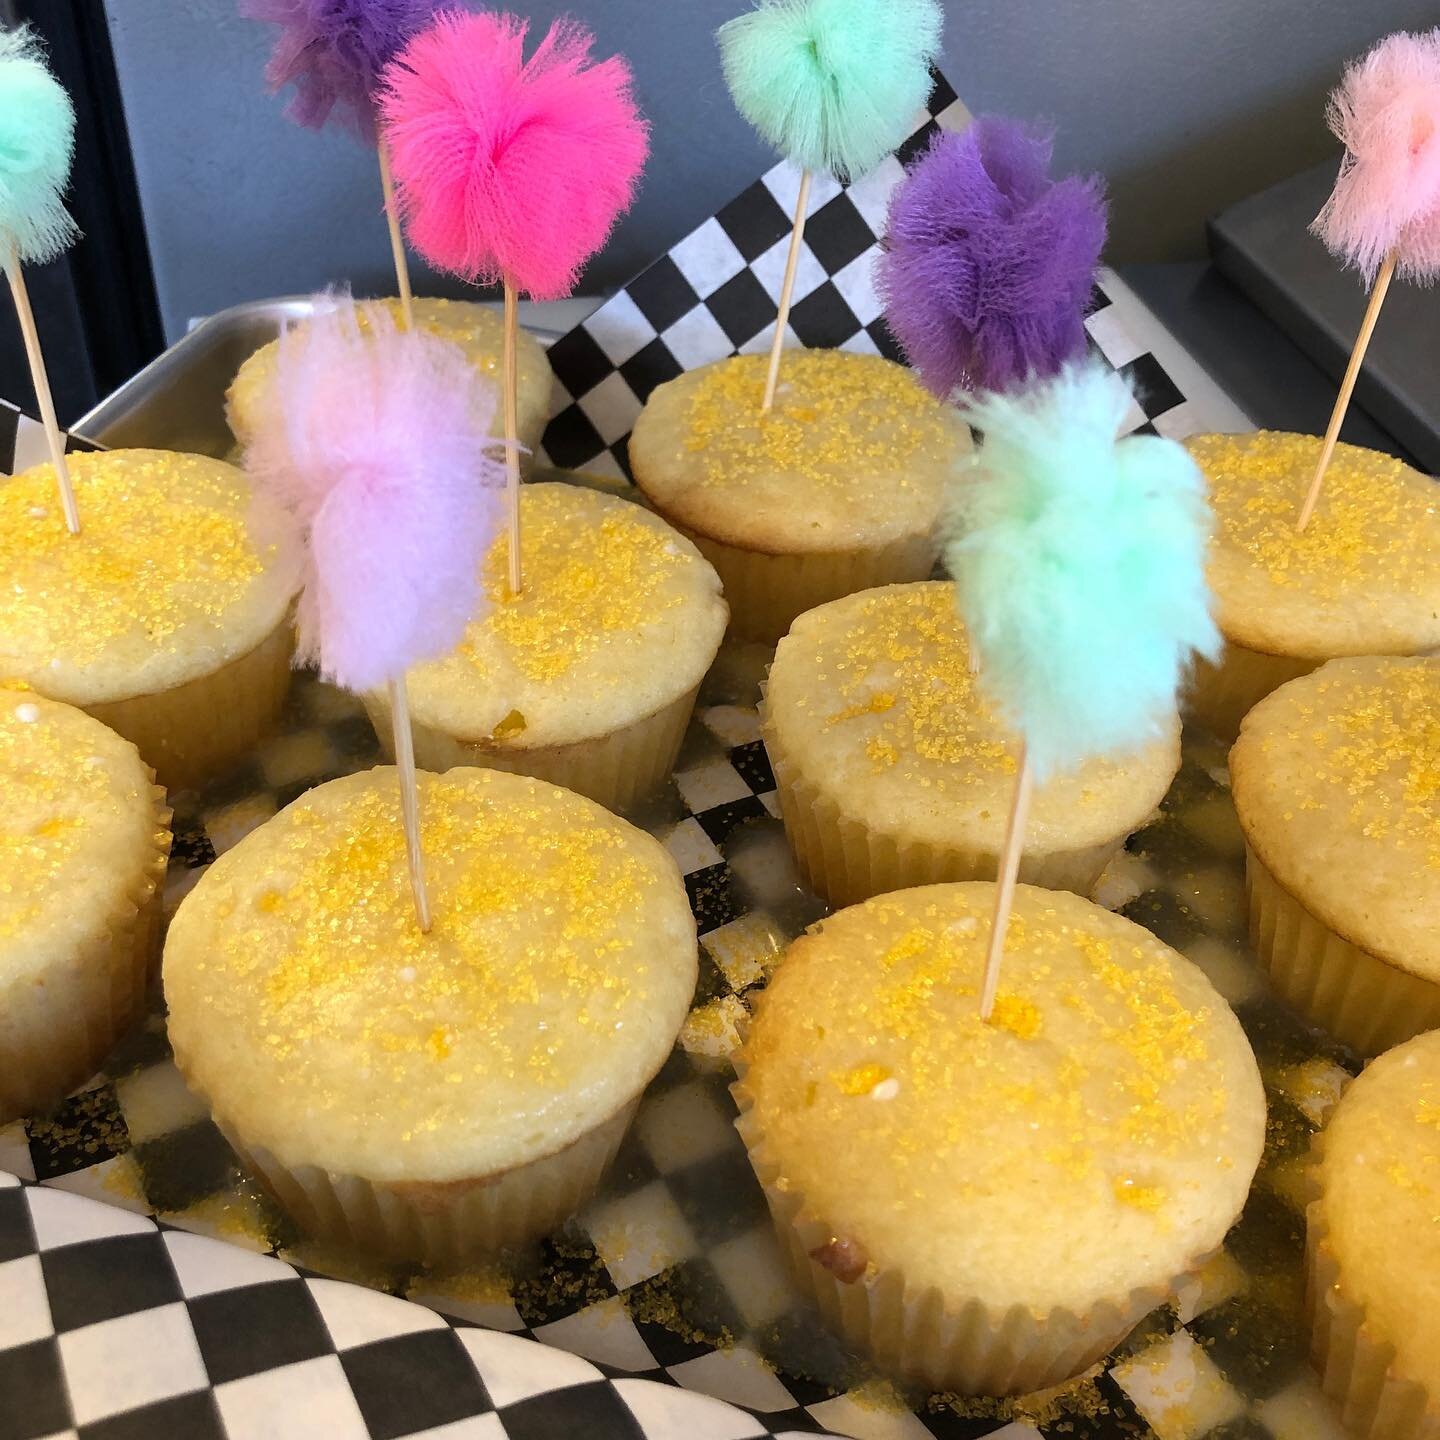 Because sometimes you just need a lemonade cupcake to get you through the day. Sweets today here at the BBQ! Swing by. We&rsquo;re here til 6pm.